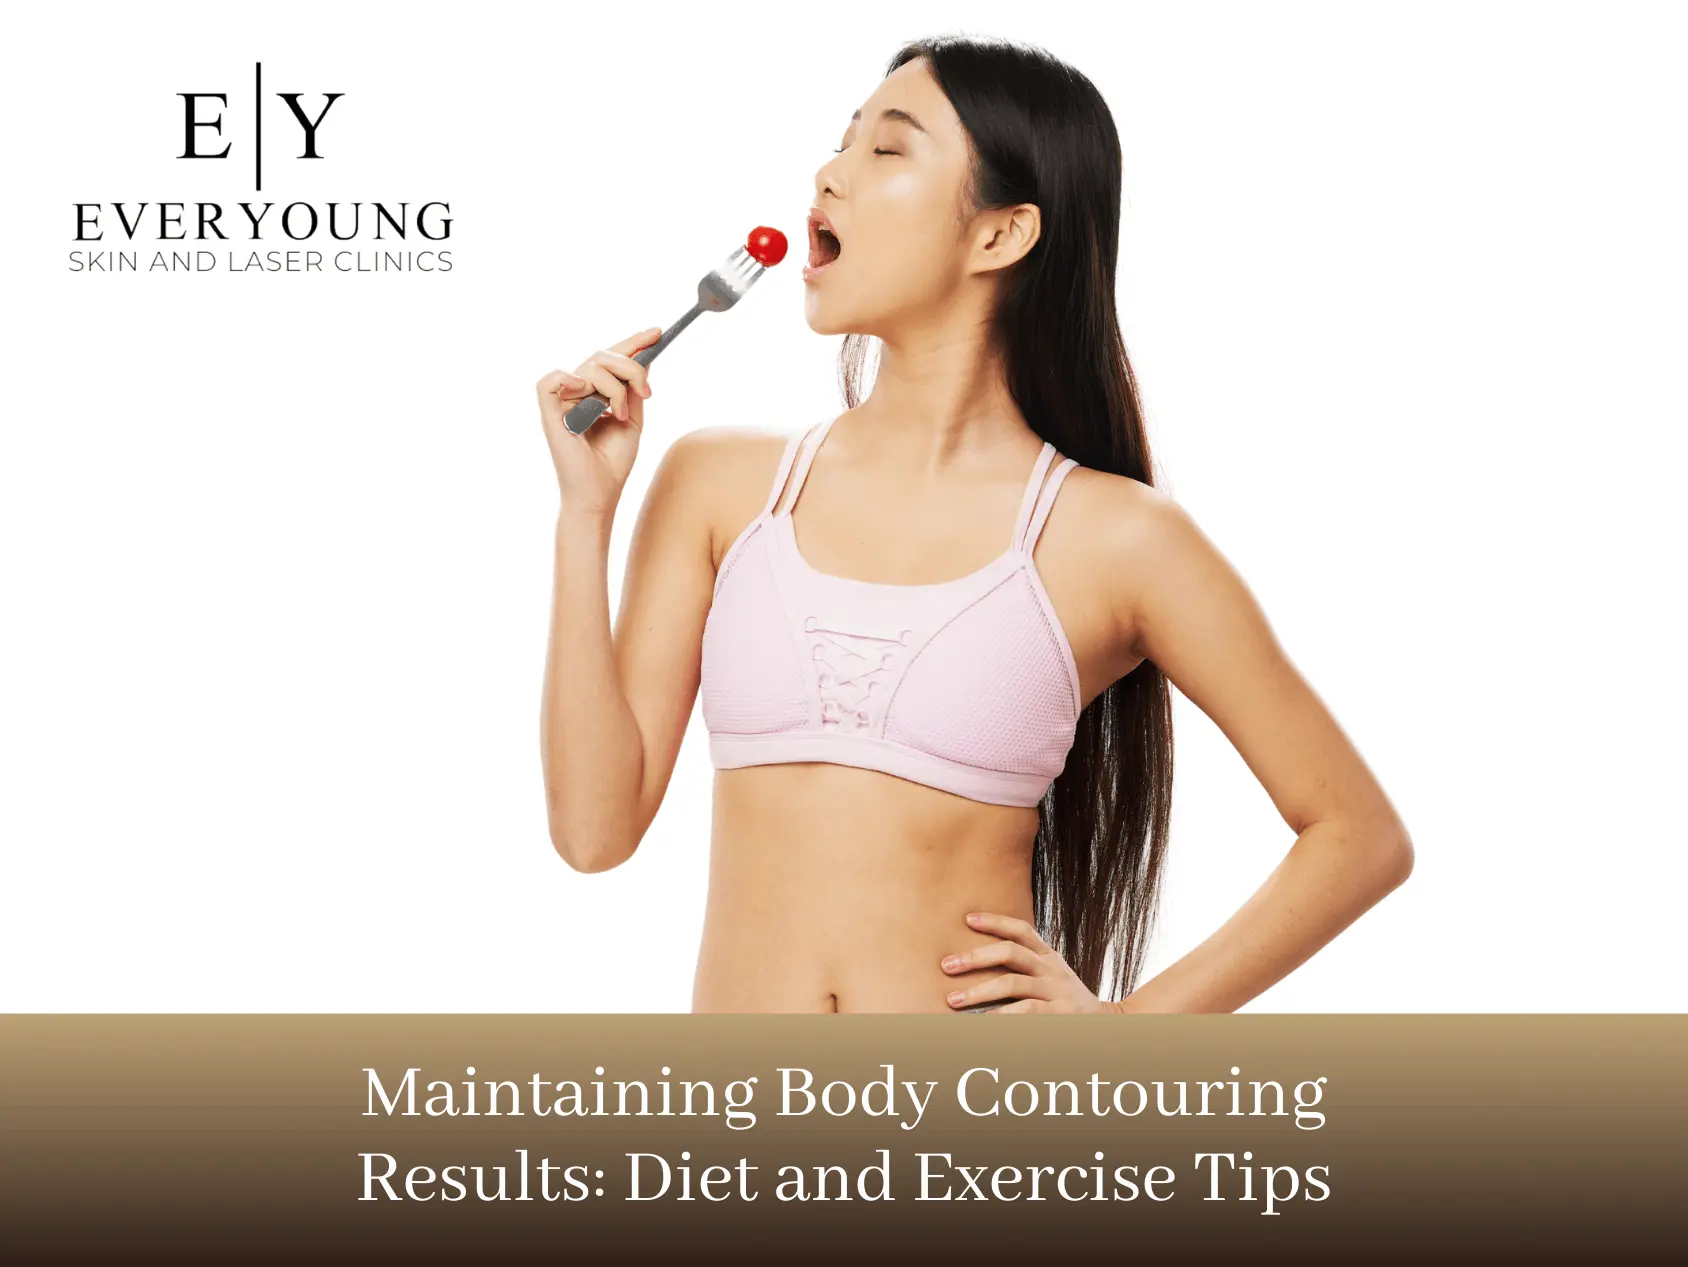 Maintaining body contouring results